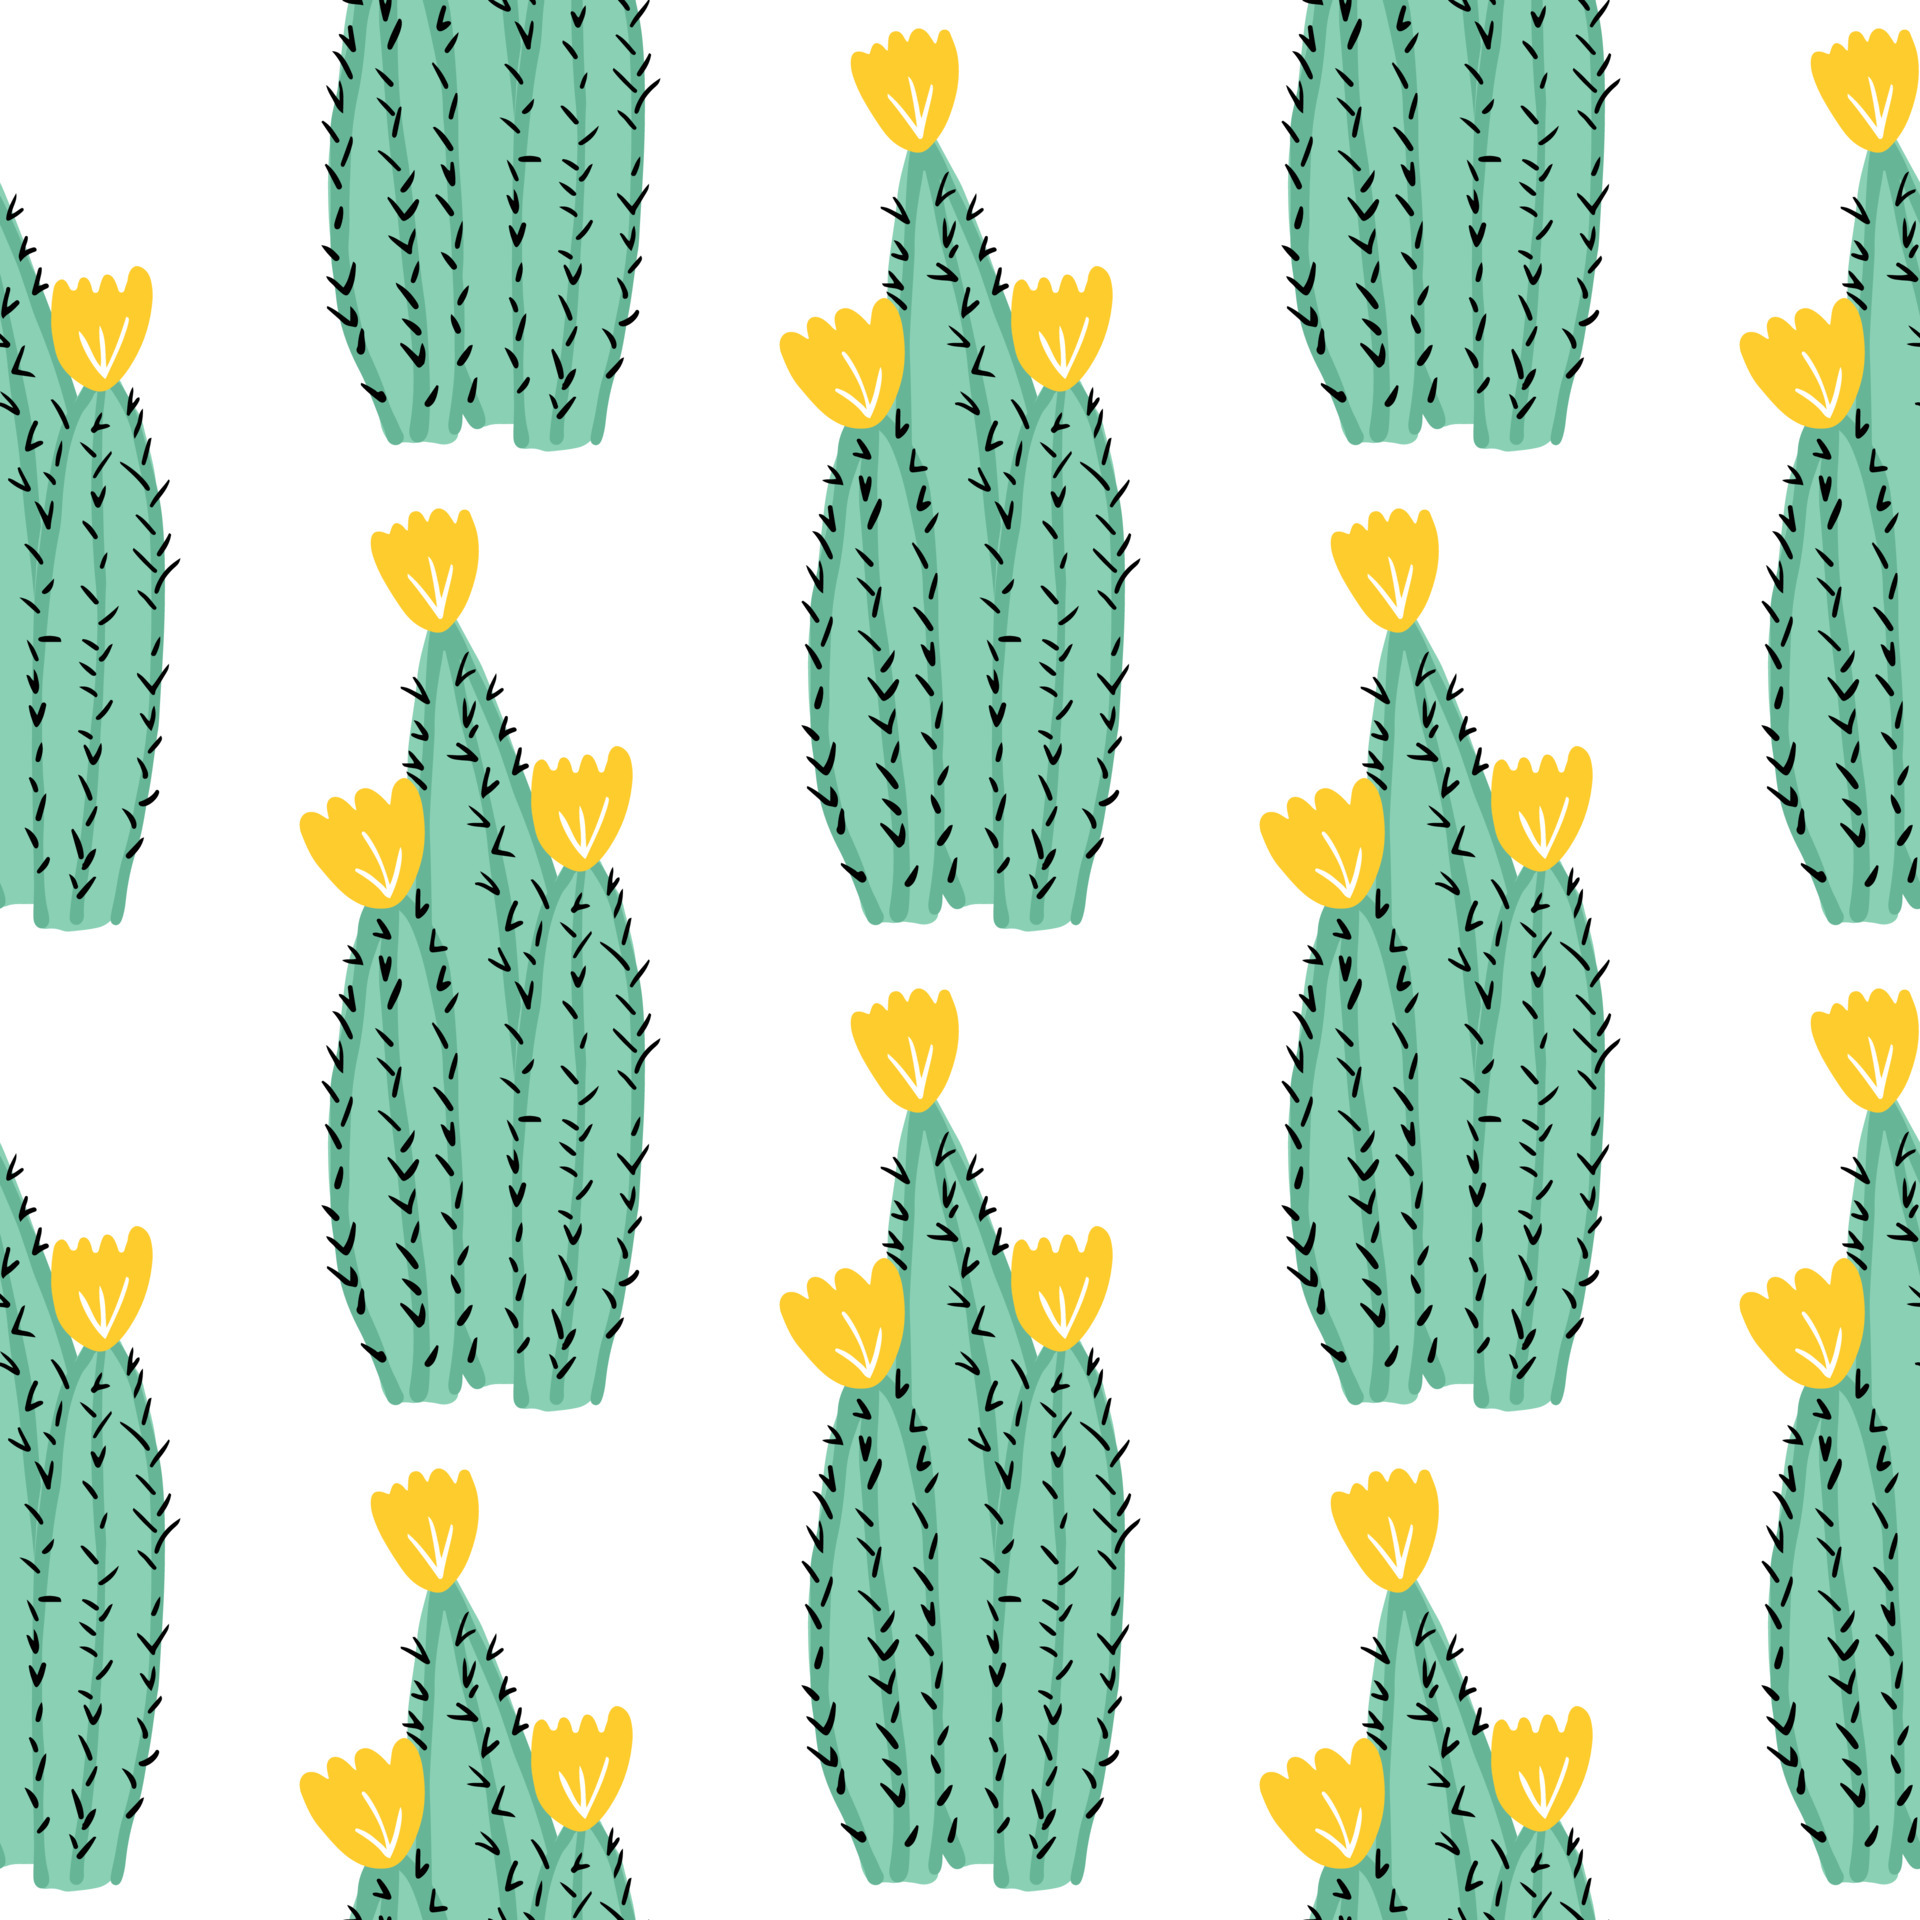 Kawaii Cute Cute Cuties Cactus Wallpaper 4k Background Cute Cactus  Pictures Background Image And Wallpaper for Free Download